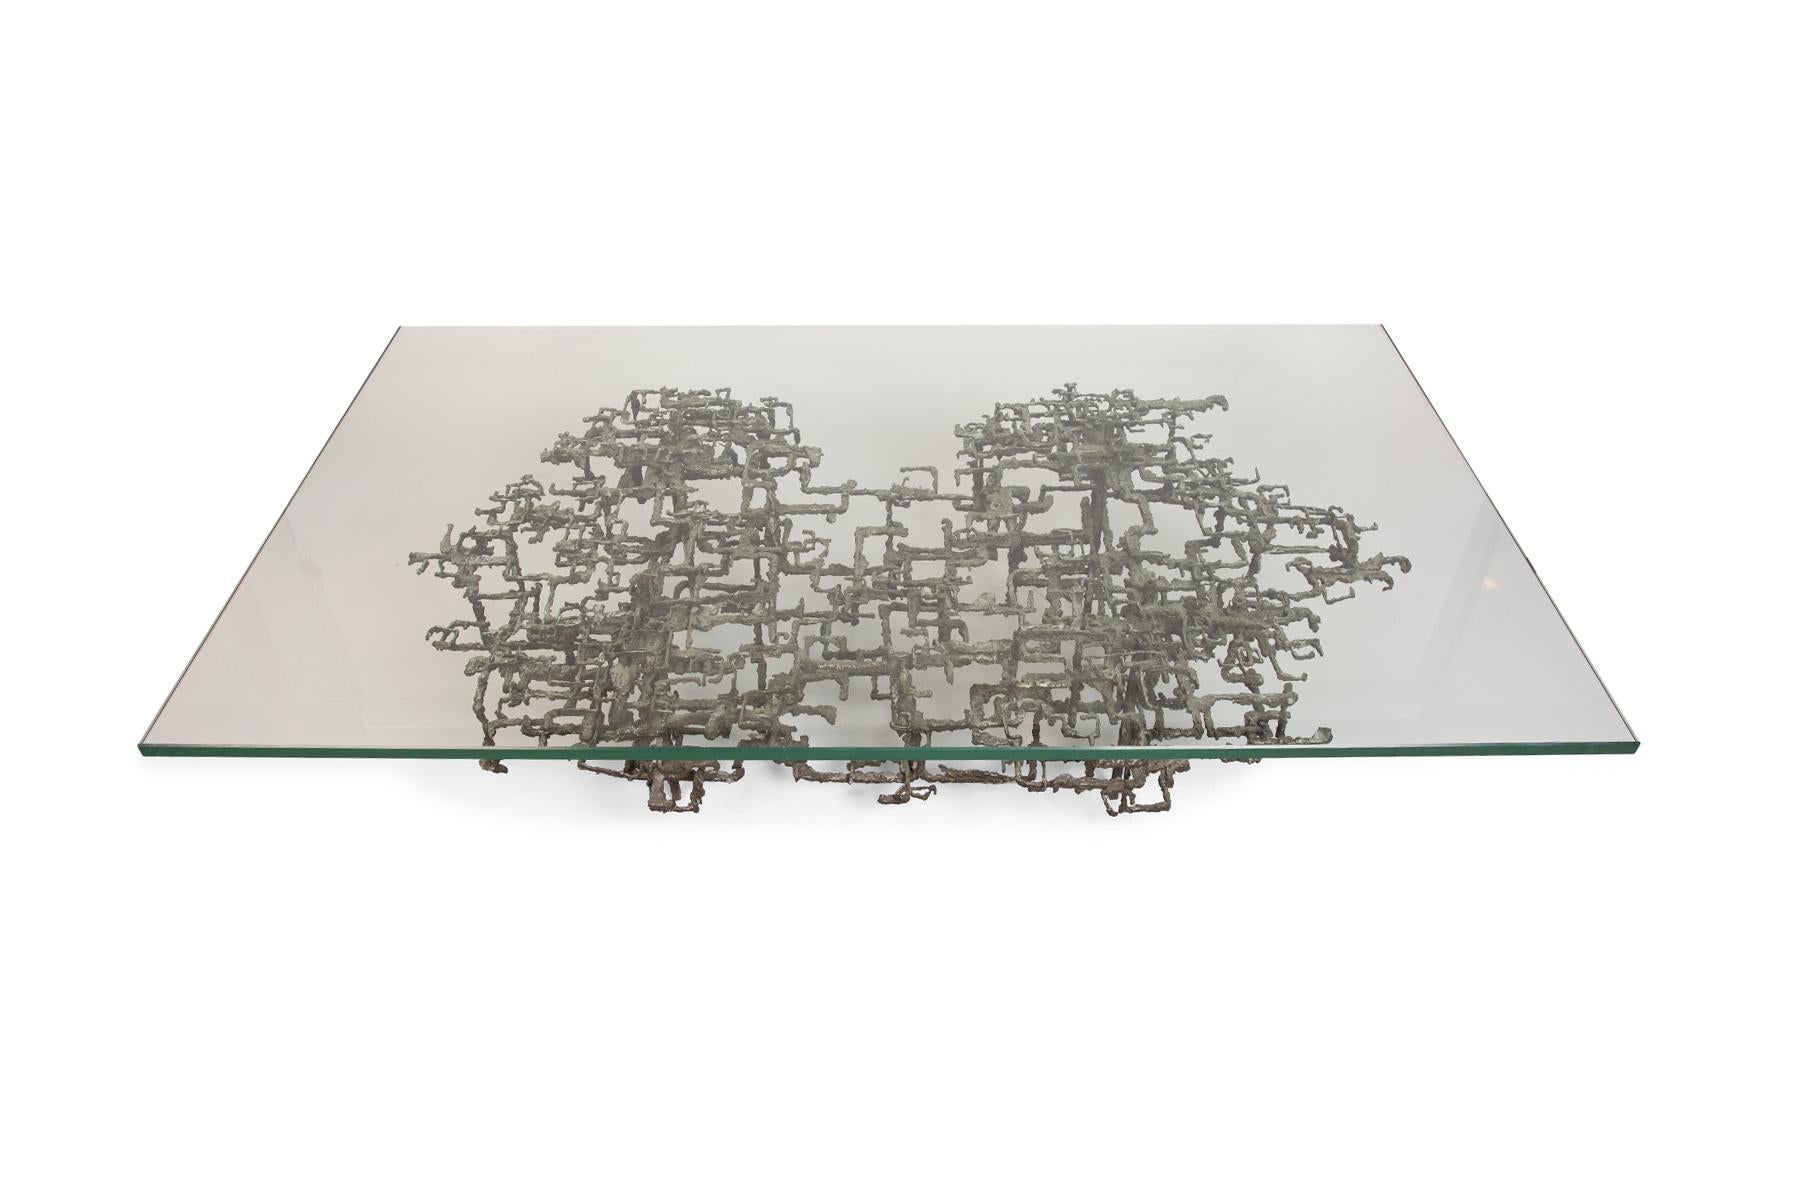 California artist Daniel Gluck steel and aluminum coffee table table circa late 1960's. All original and signed.